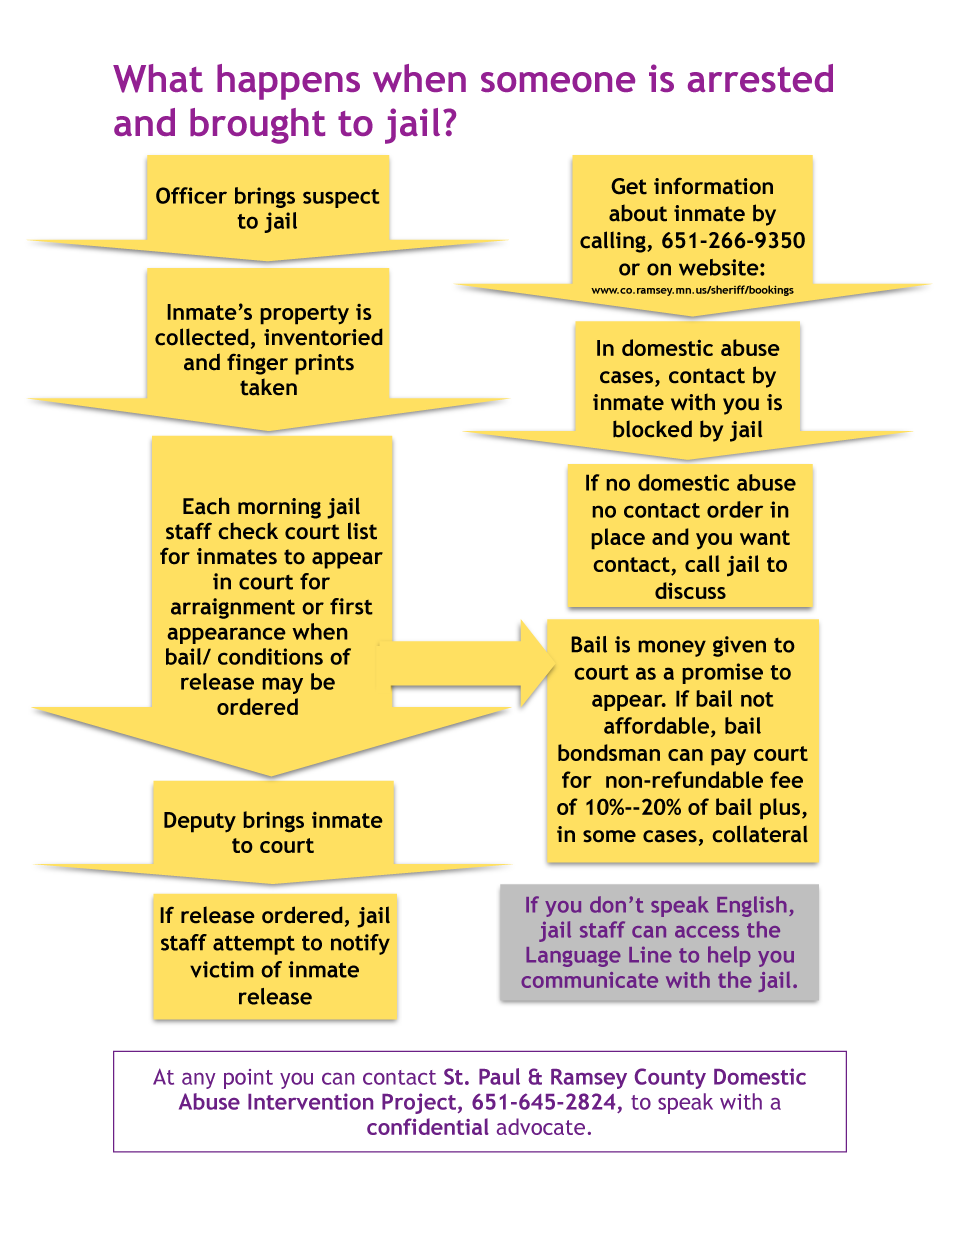 Quick Reference Chart: What happens when someone is arrested and brought to jail?